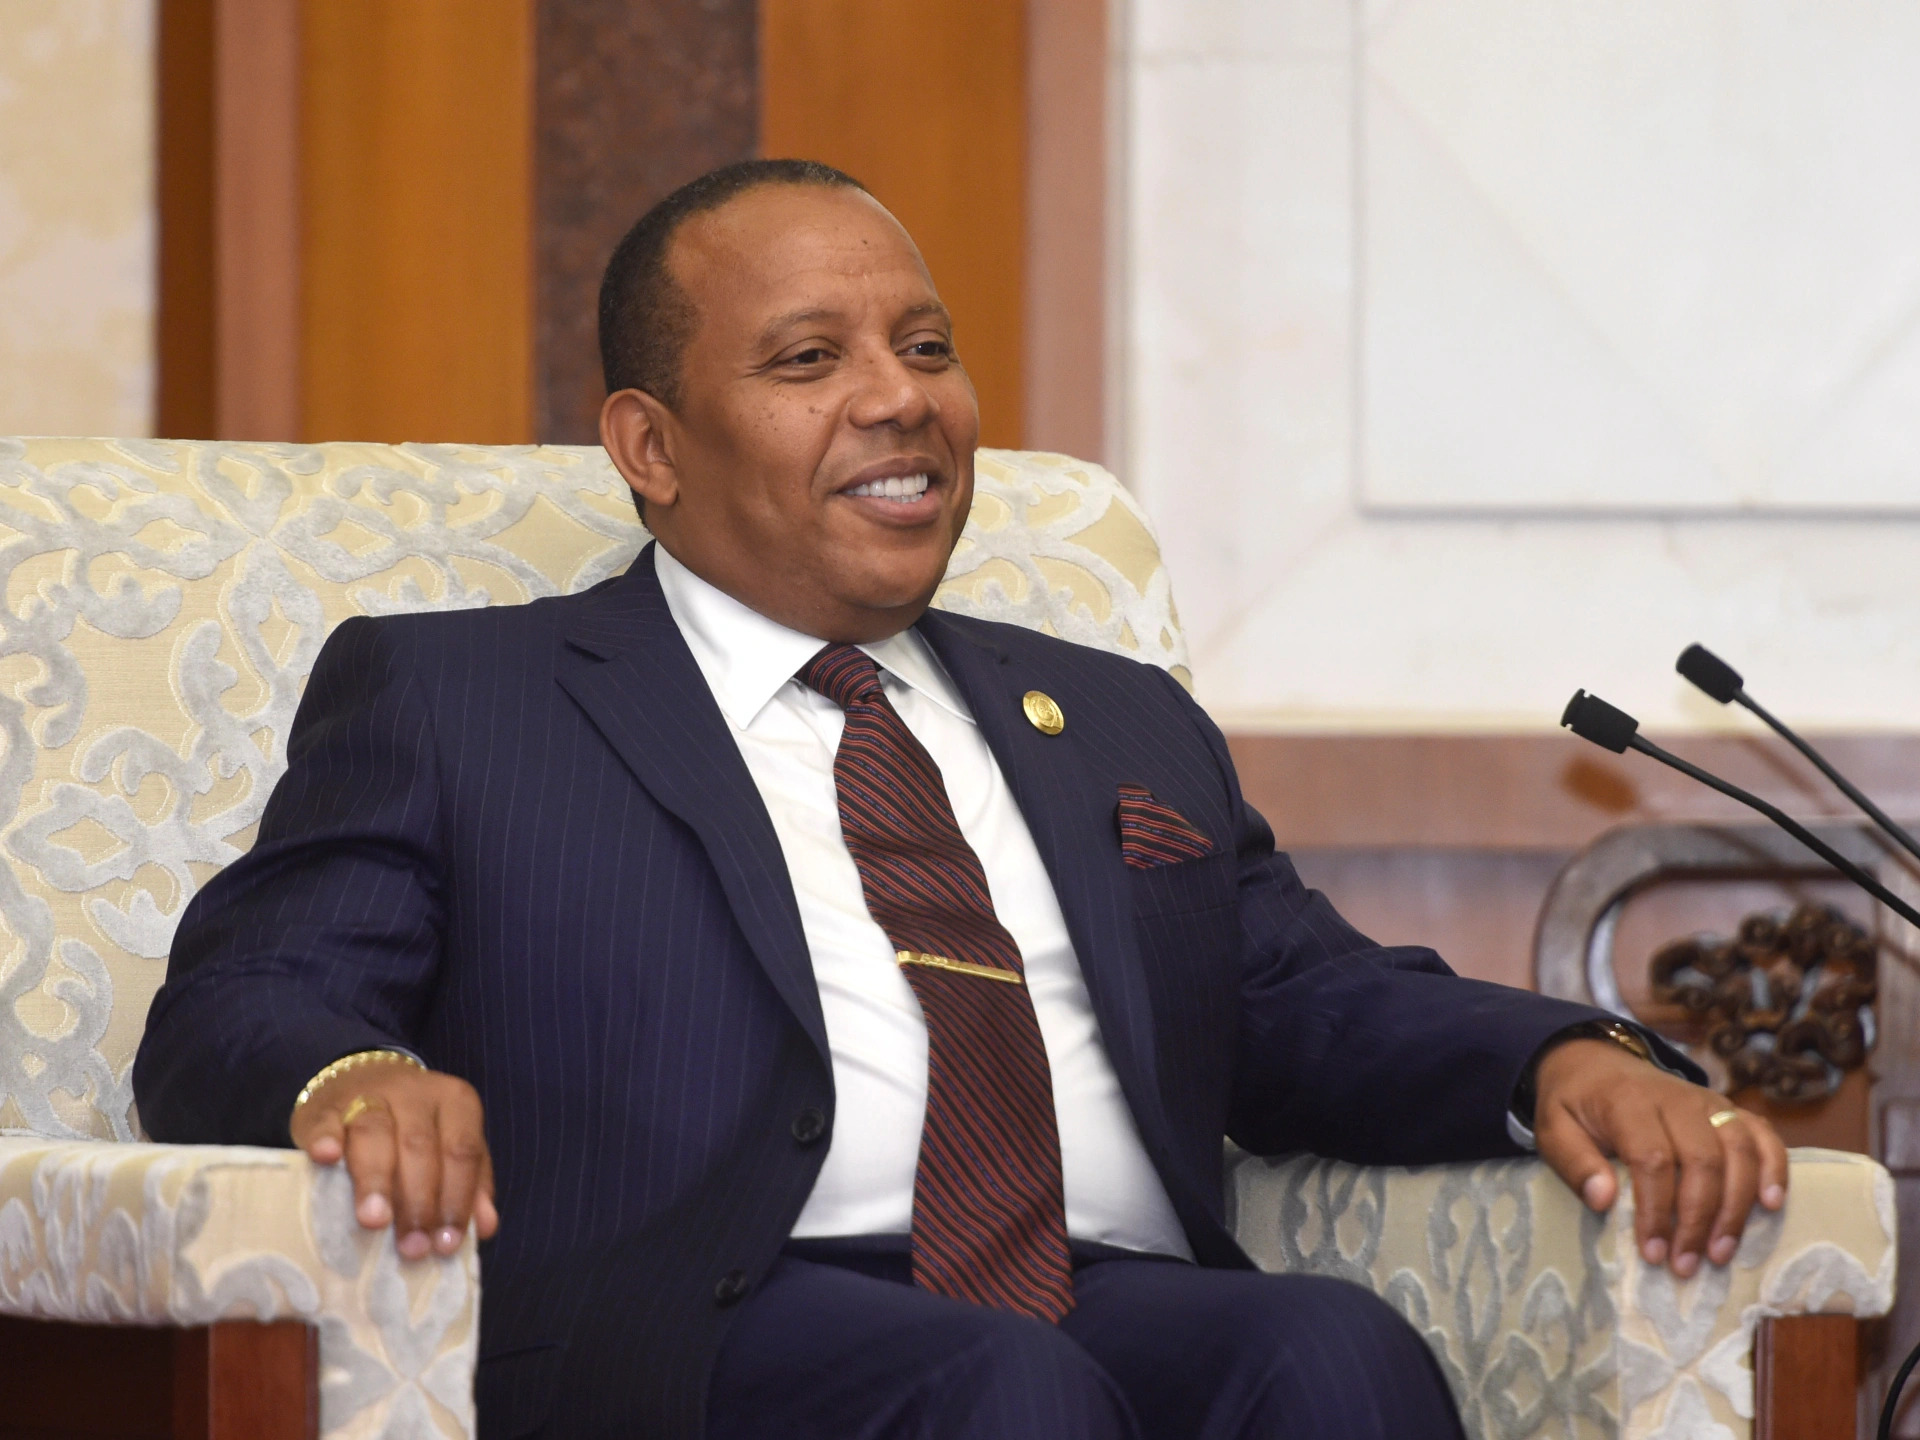 São Tomé and Príncipe President Patrice Trovoada revealed on Friday that his government had thwarted an attempted coup by ‘mercenaries’ the previous day. 